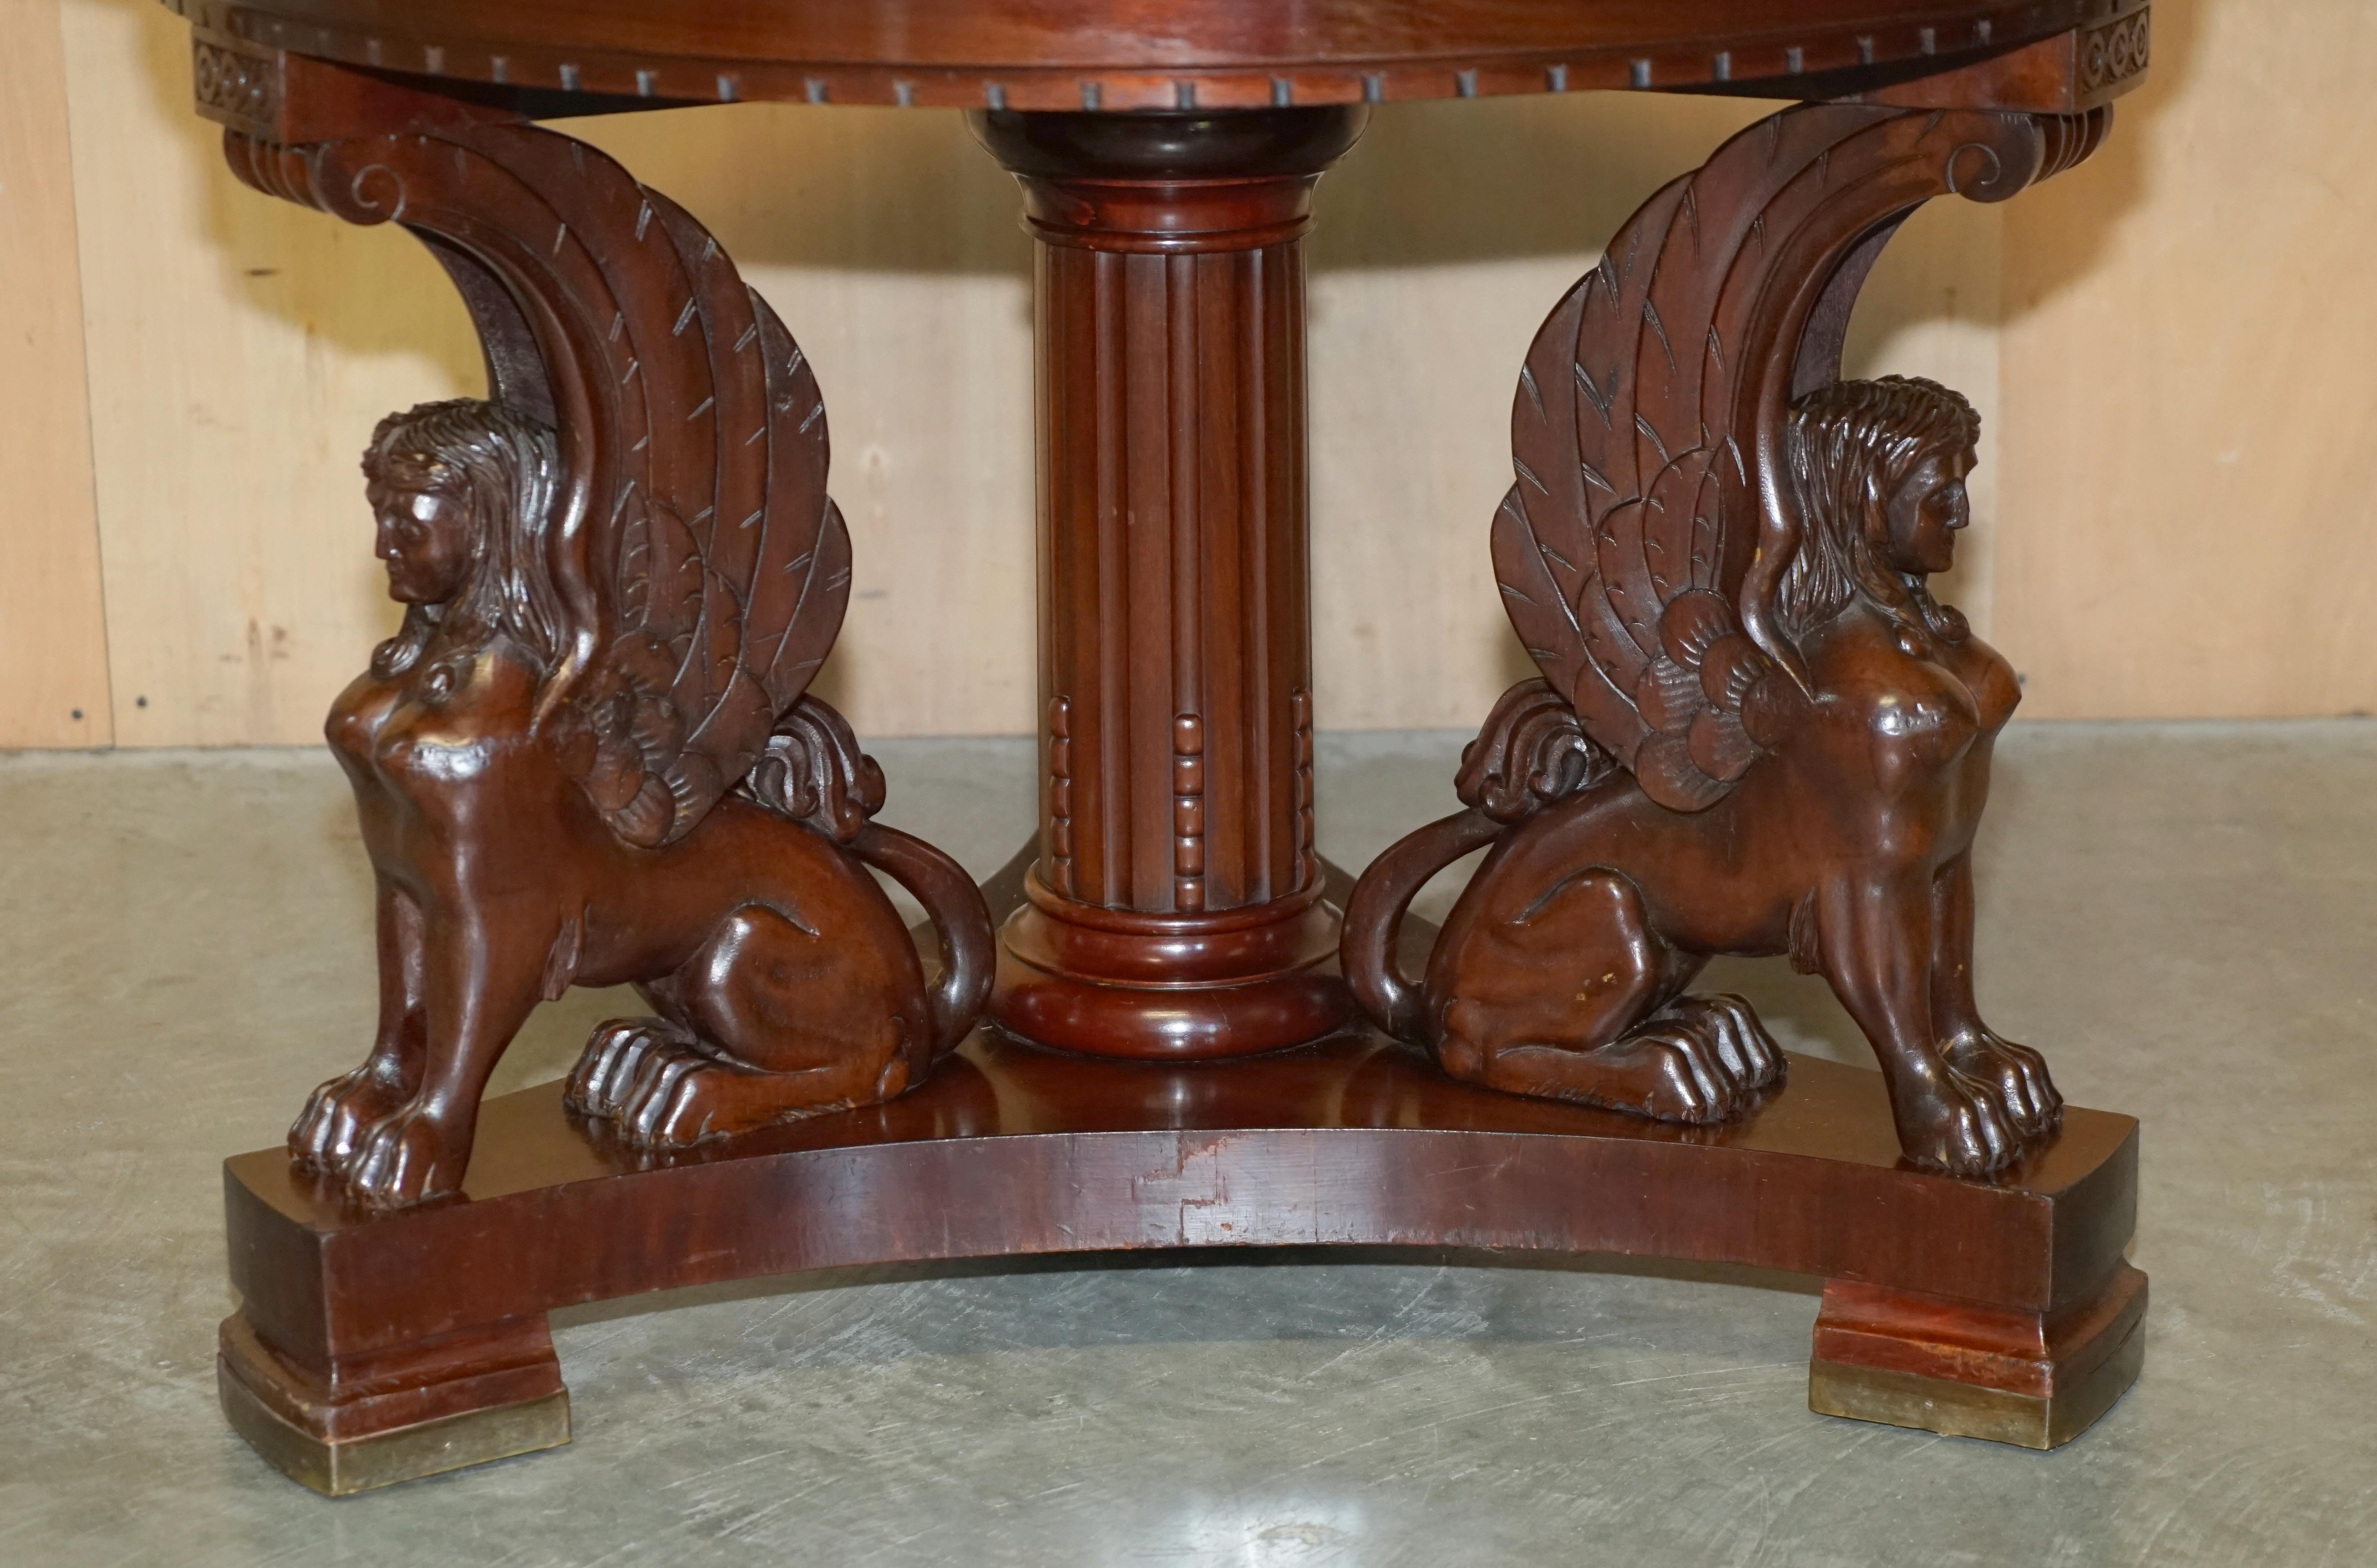 FINE ANTIQUE FRENCH NEOCLASSICAL HARDWOOD CENTRE TABLE WiTH SPHINX PILLARED BASE (Handgefertigt) im Angebot